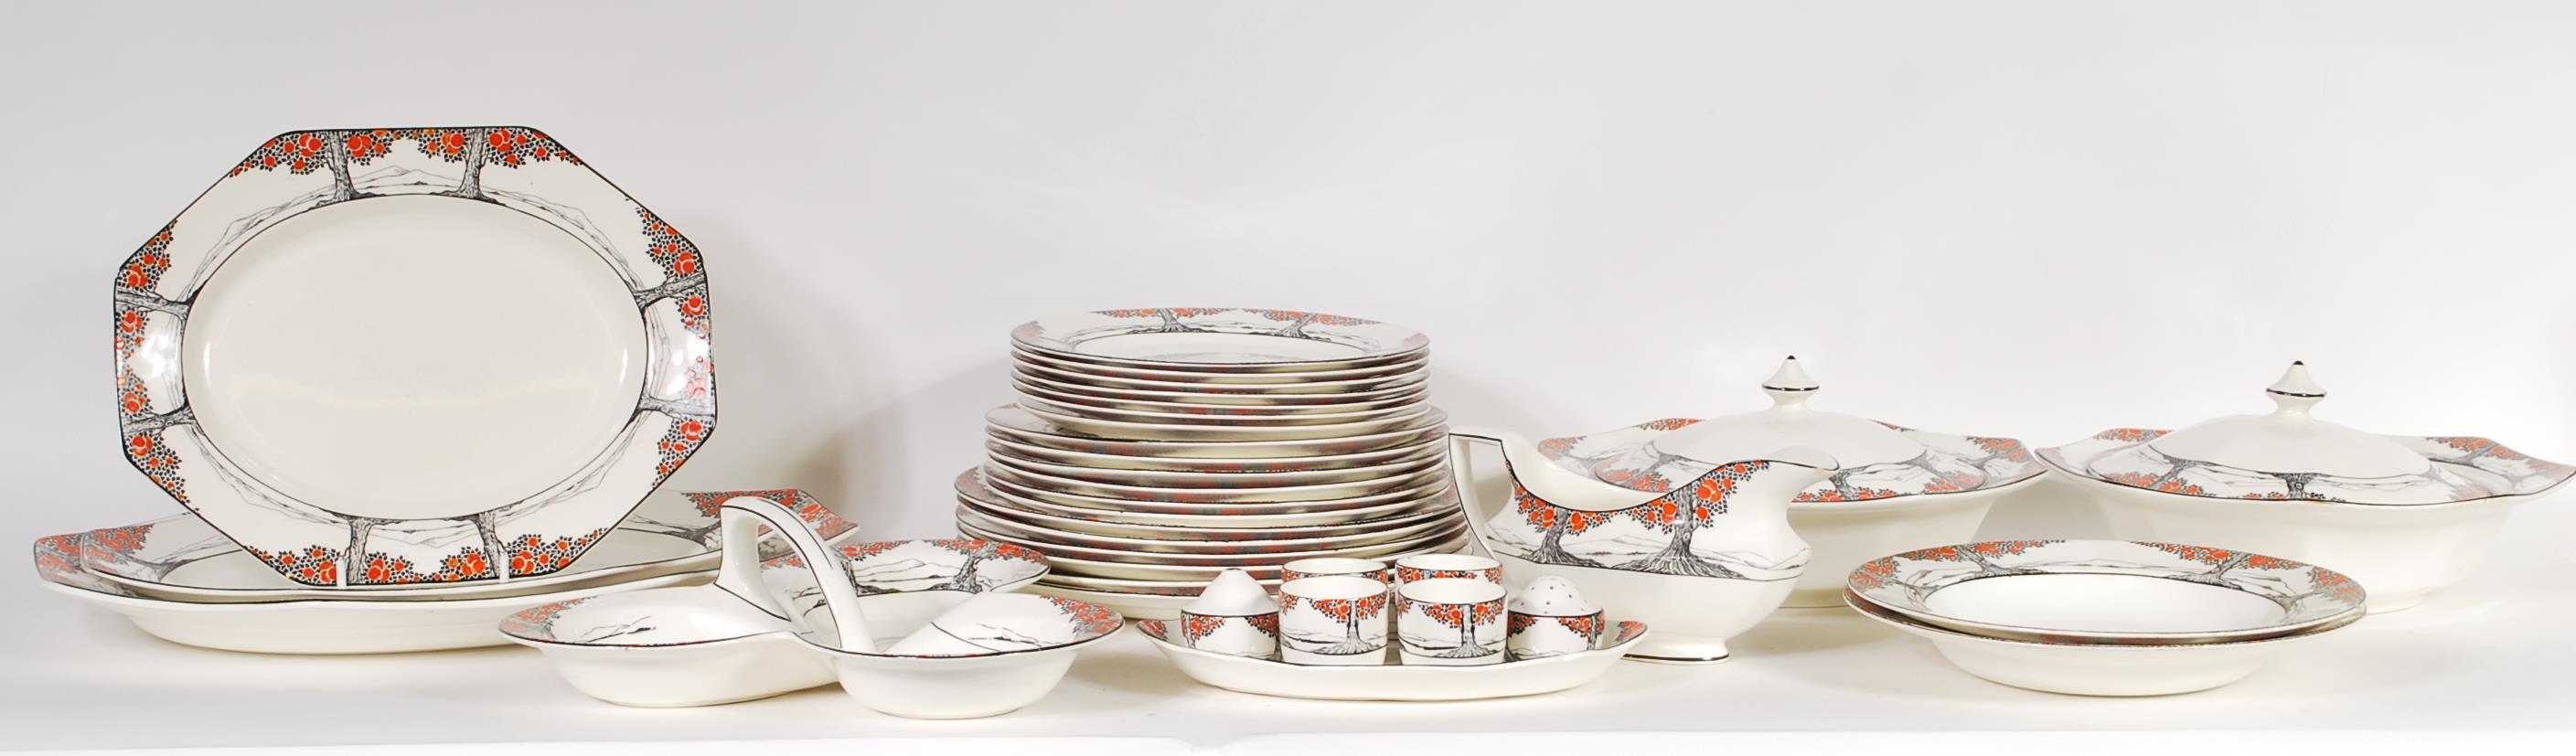 A rare Crown Ducal early 20th Century Art Deco ceramic dinner service in the Orange Tree pattern